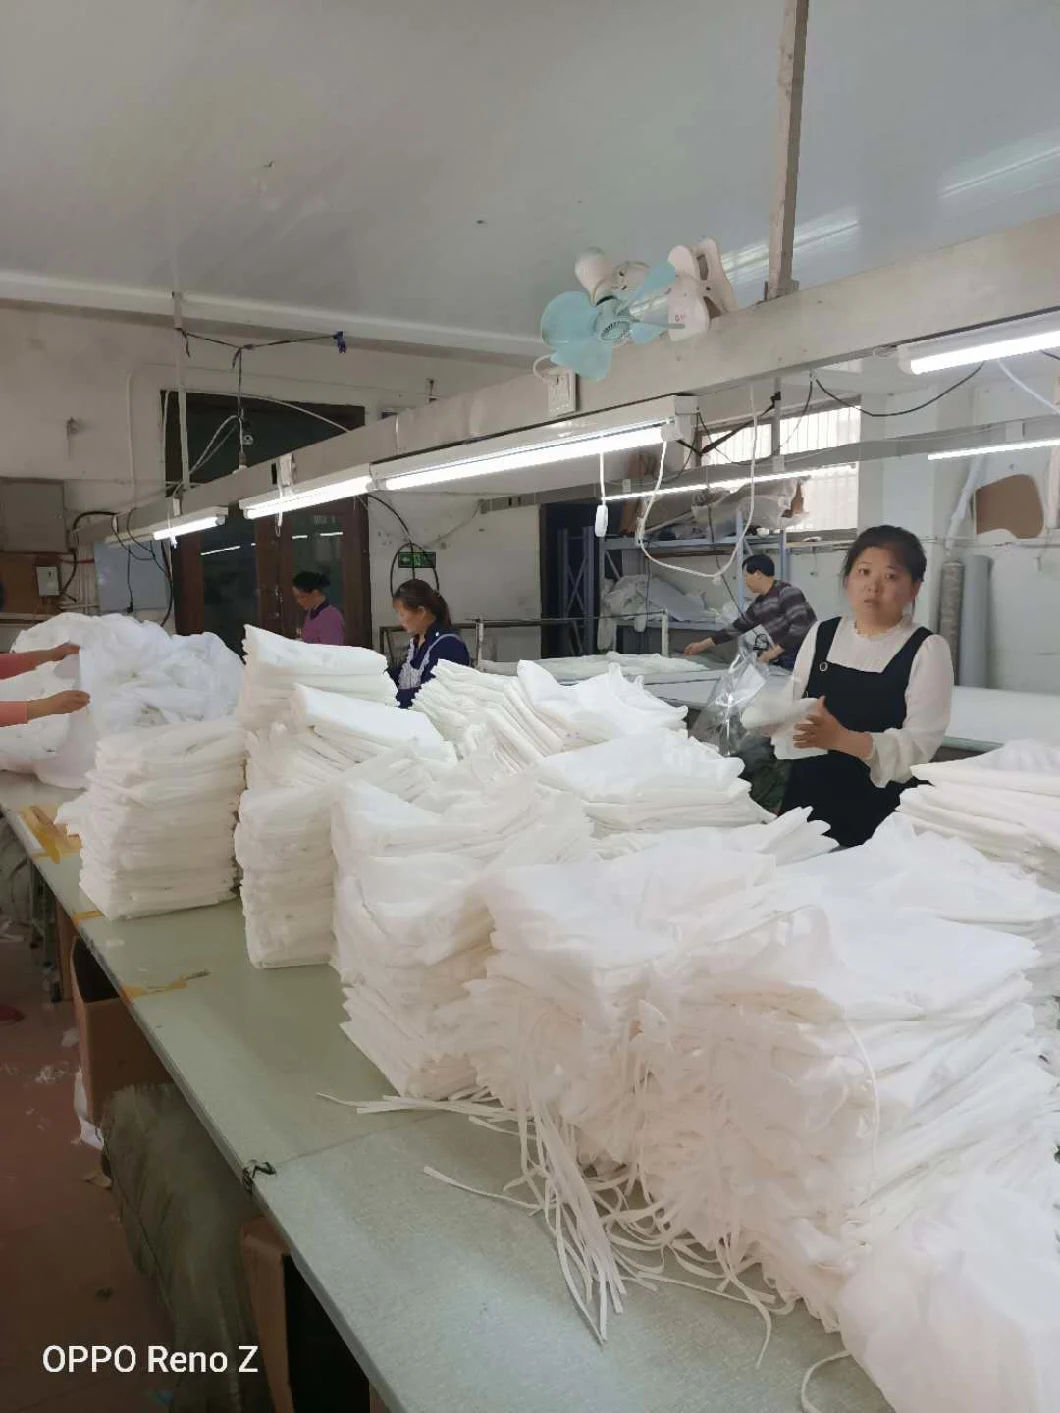 Medical Supplies Mop Head Covering Biodegradable Non Woven Cover Spunbond Bouffant Suppliers of Beanie Cap in China